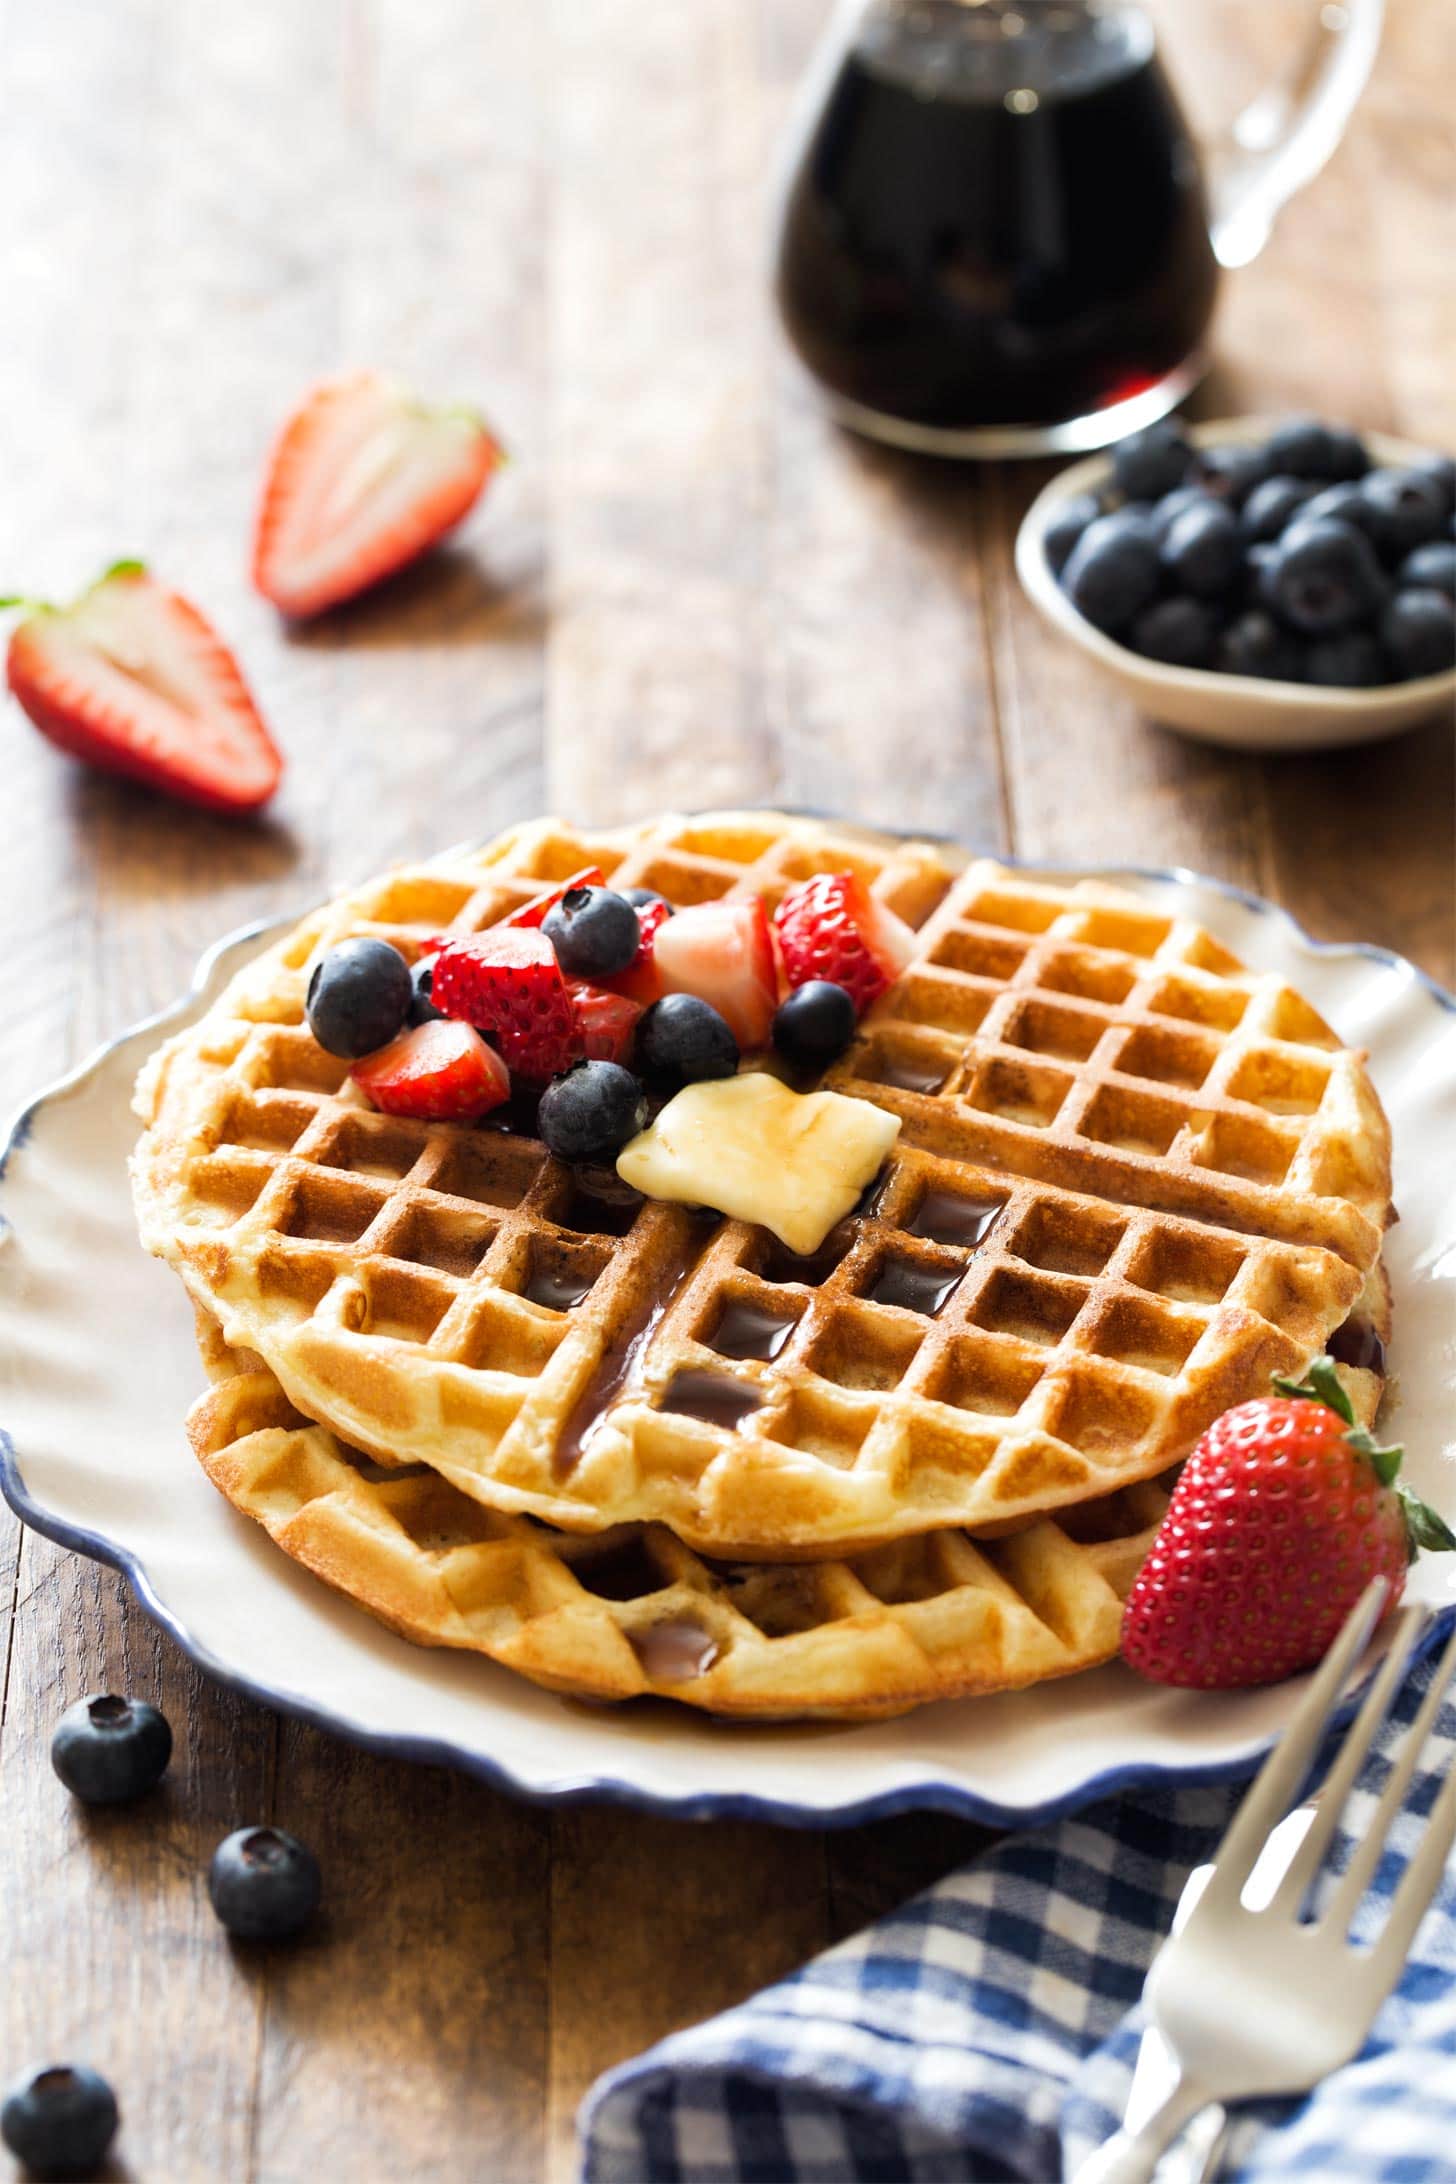 Stacked waffles for two with fresh berries, butter, and syrup on white plate